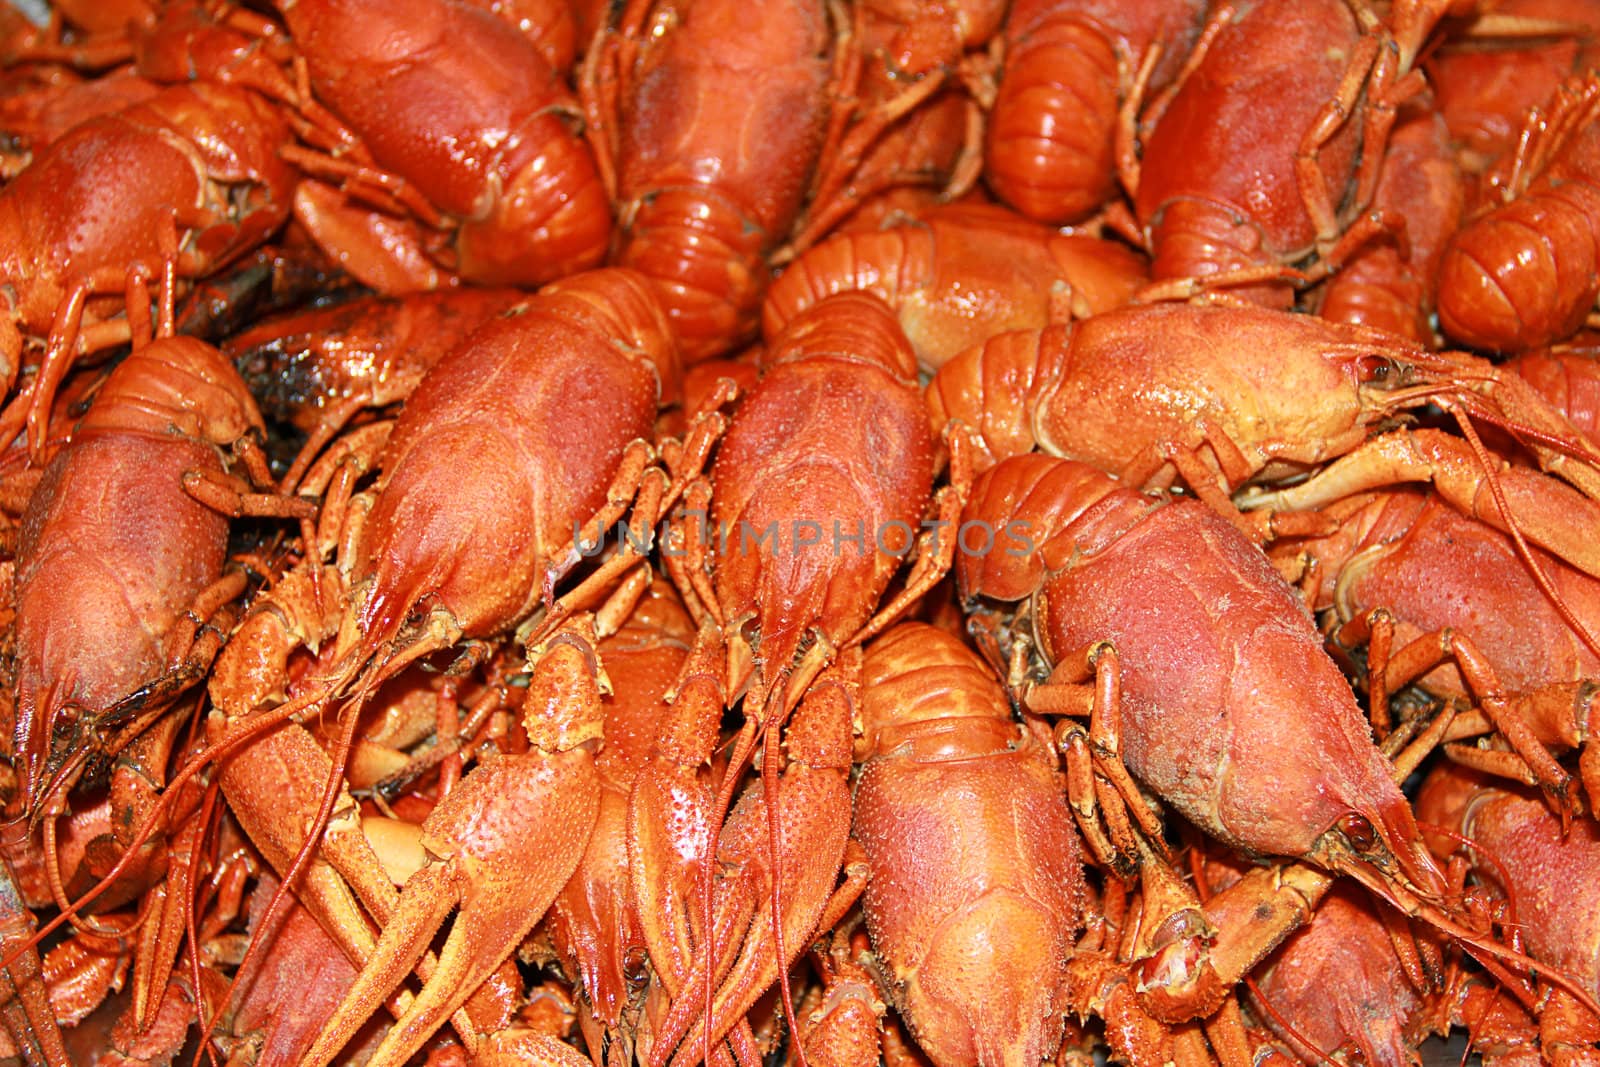 Background with many boiled crawfishes